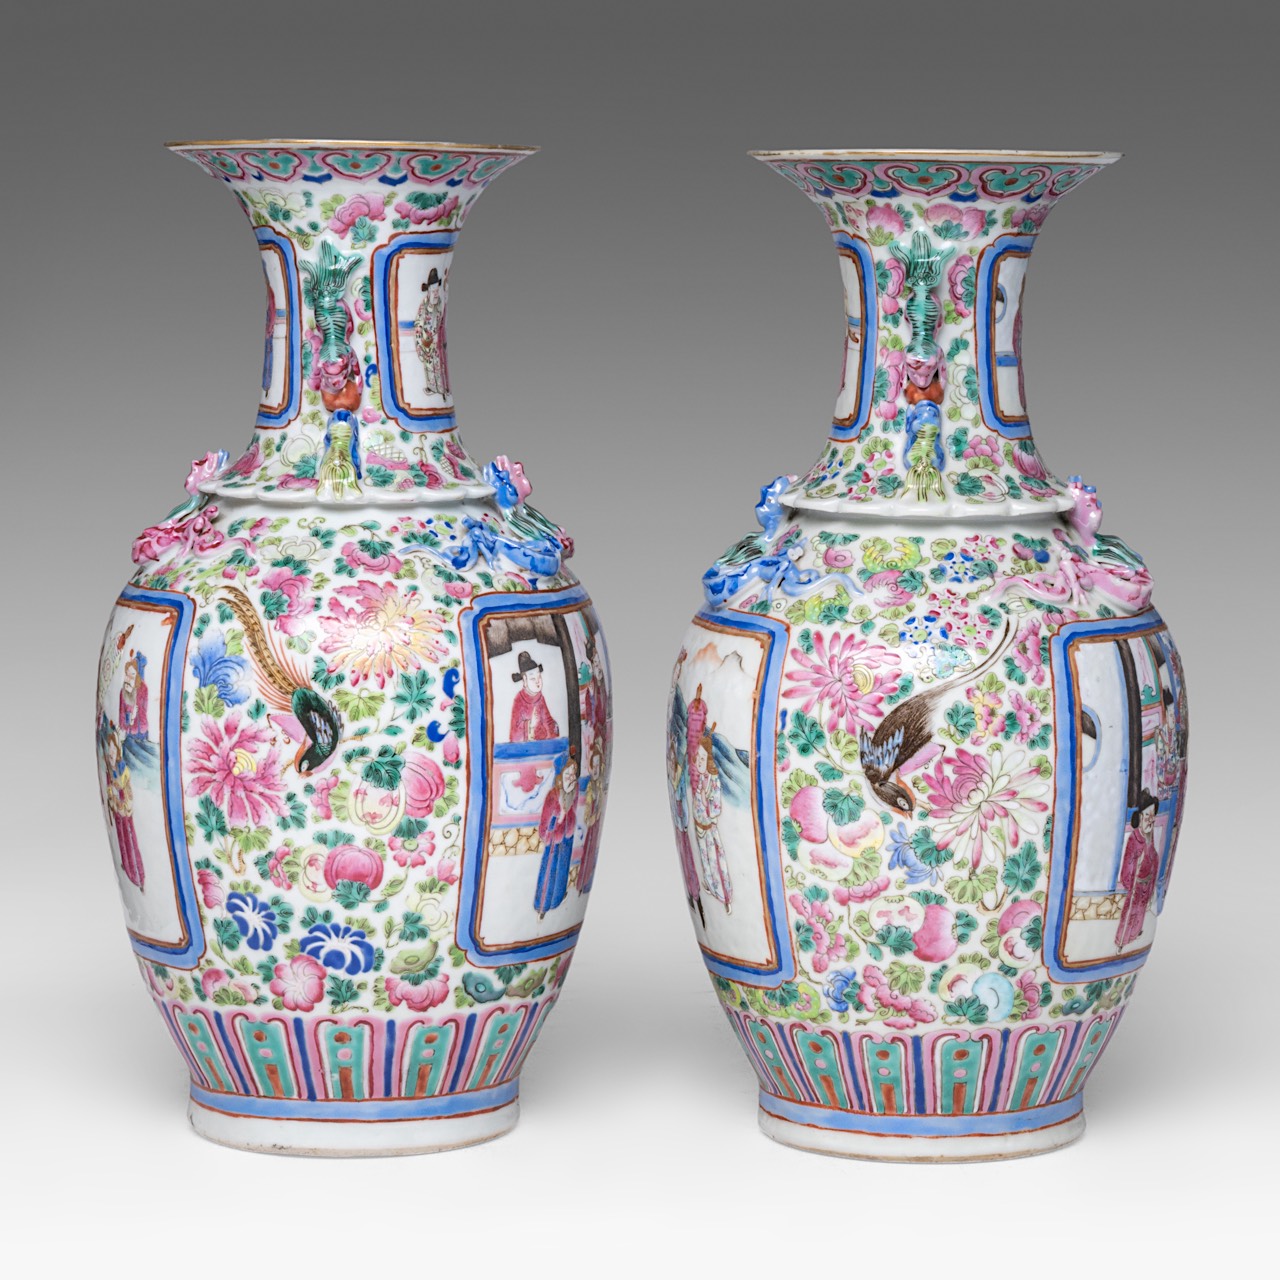 A pair of Chinese famille rose 'Romance of the Three Kingdoms' vases, late 19thC, H 43 cm - added a - Image 3 of 13